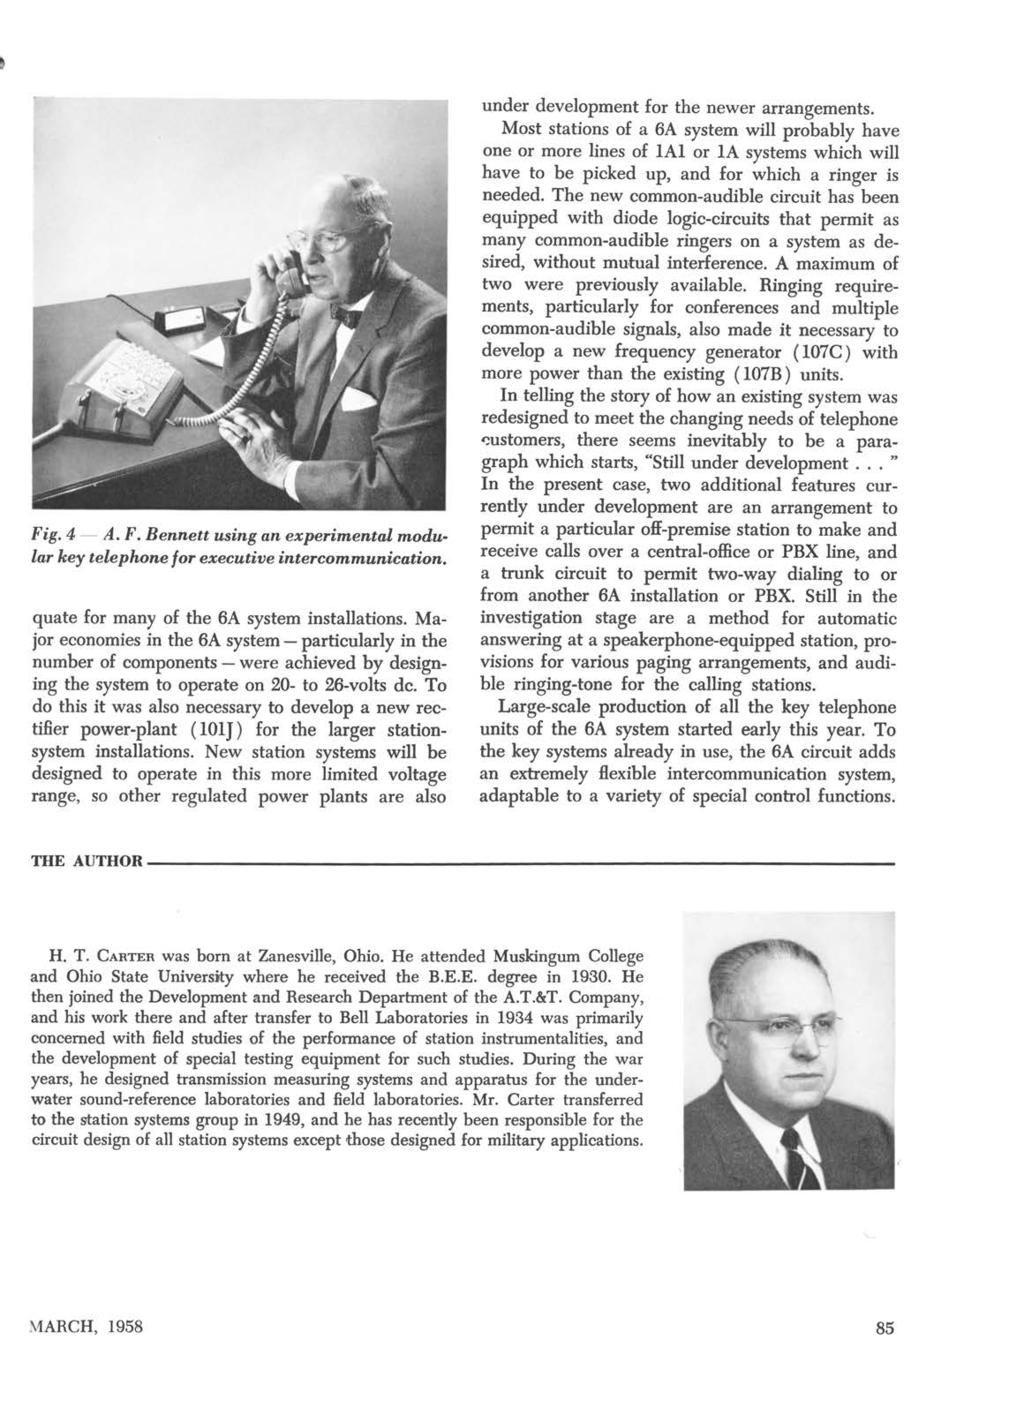 Fig. 4 - A. F. Bennett using an experimental modular key telephone for executive intercommunication. quate for many of the 6A system installations.